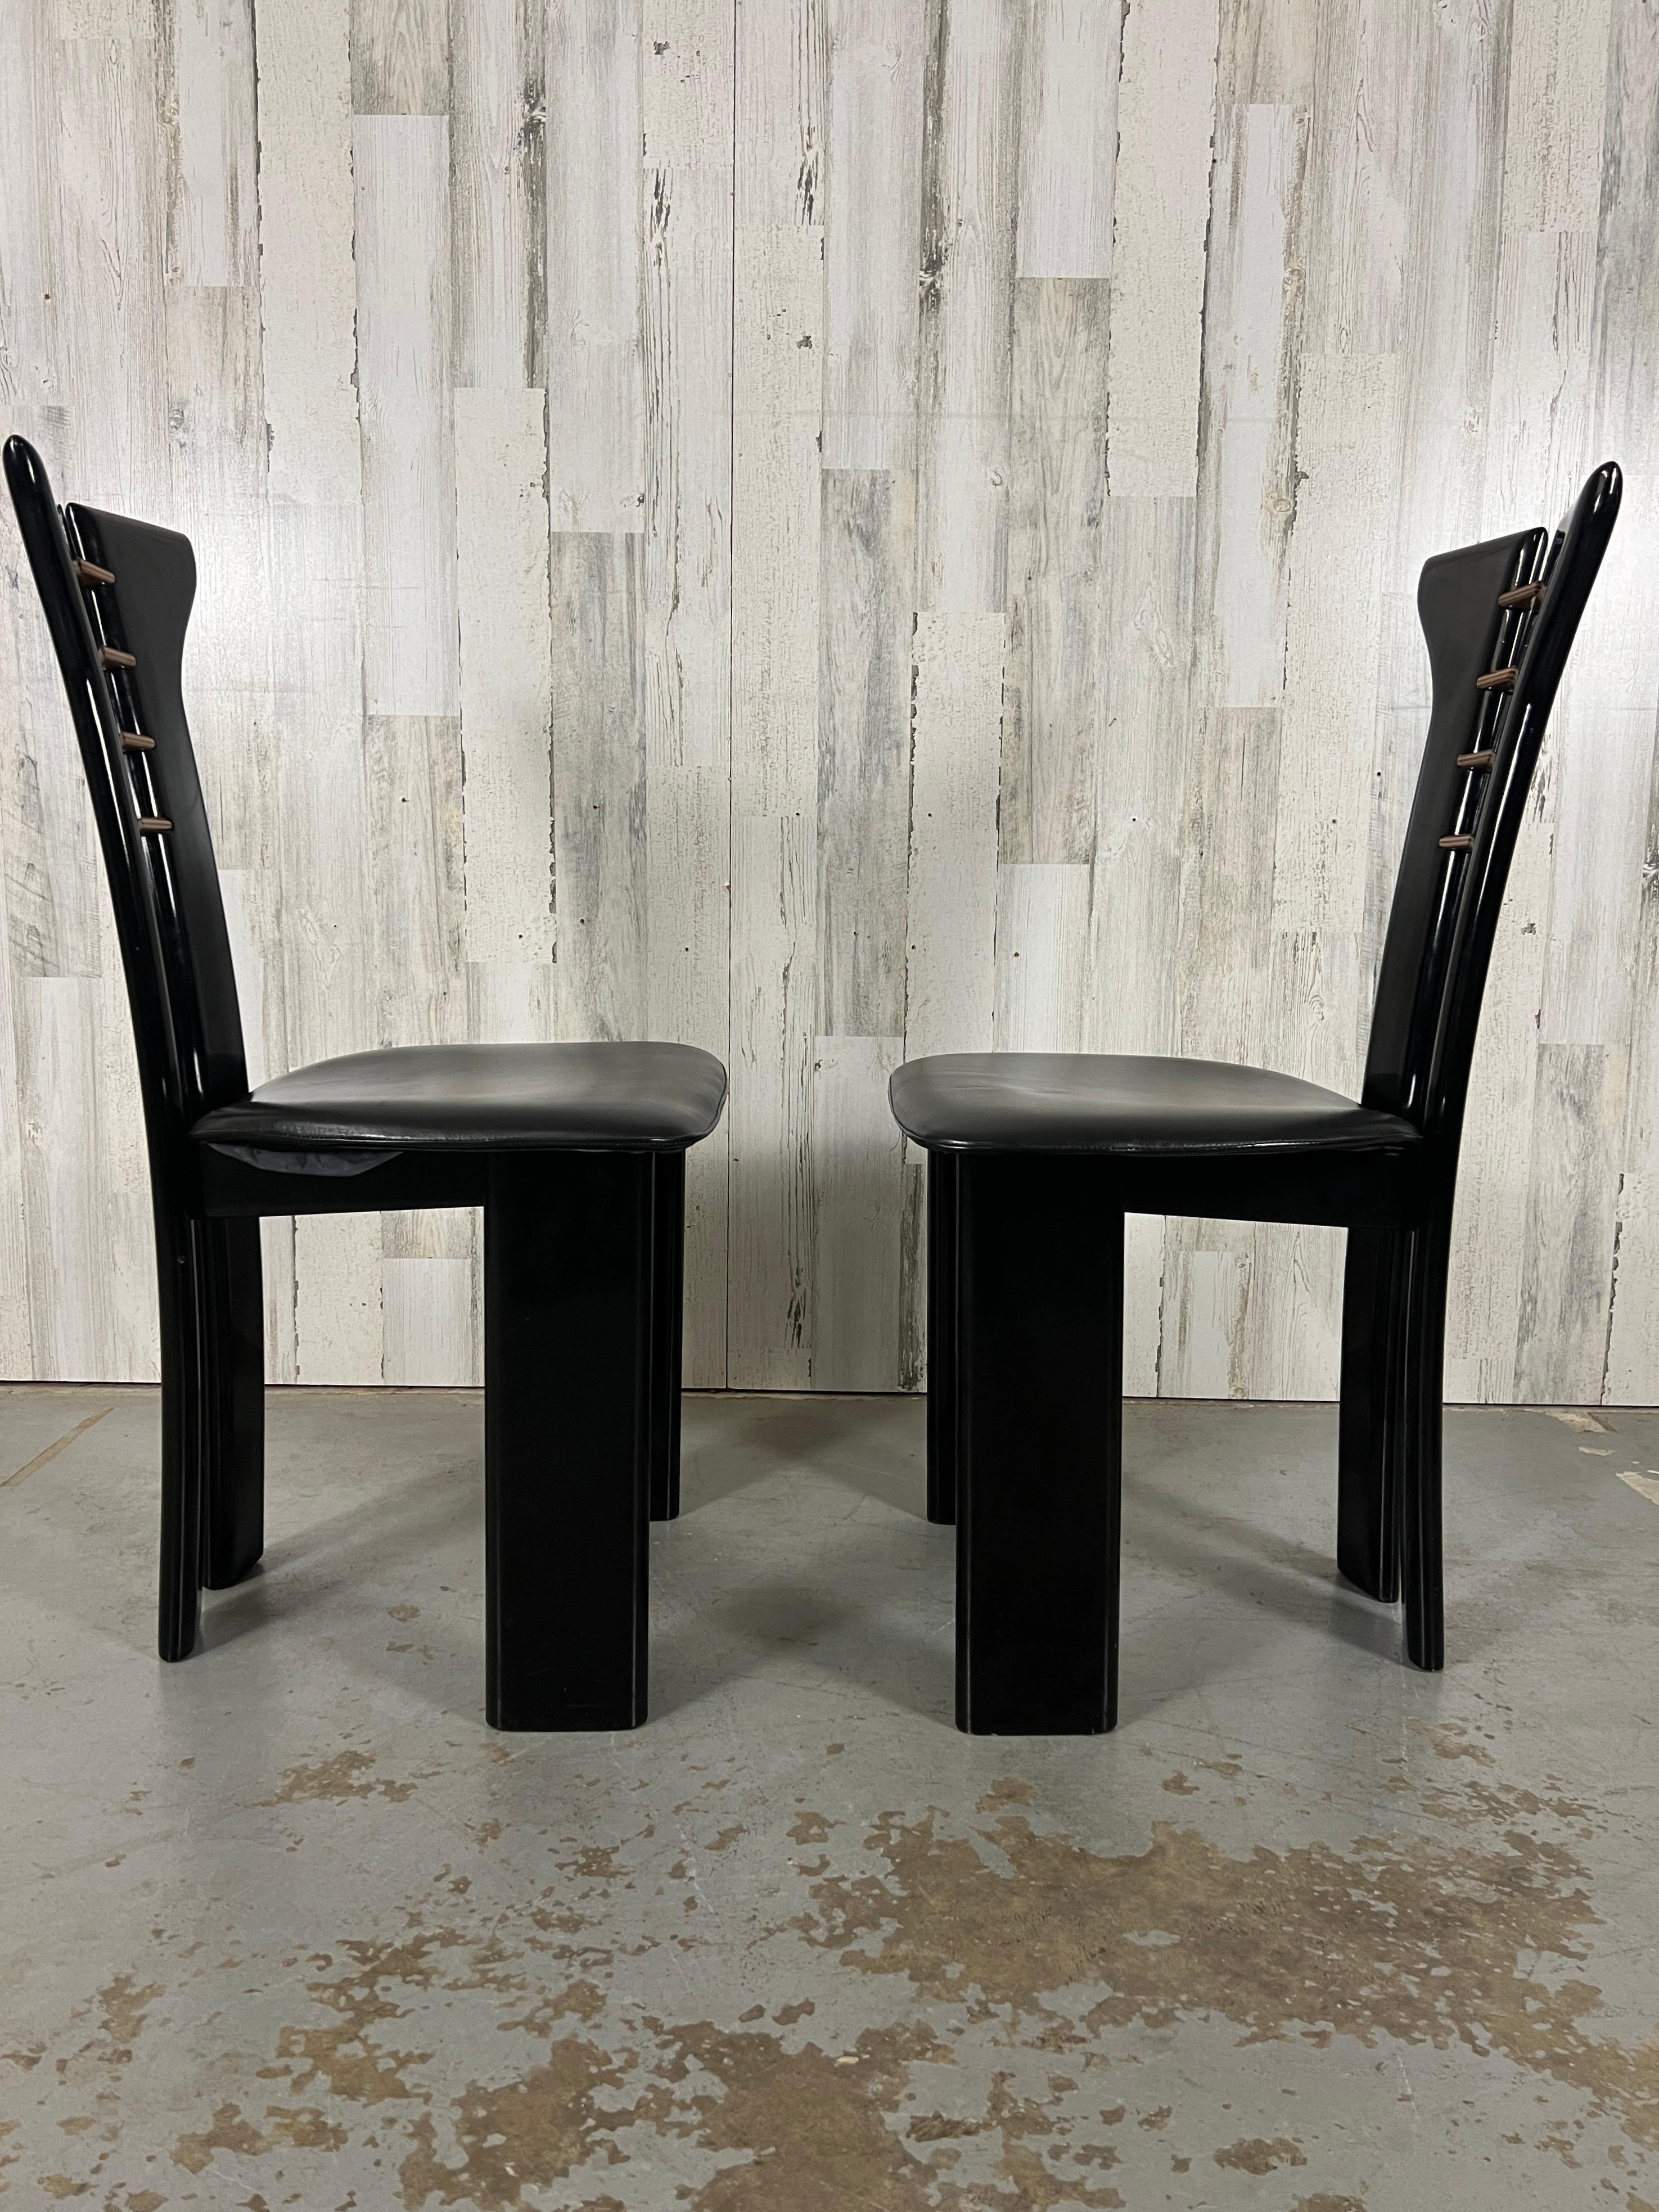 Pierre Cardin For Roche Bobois  Black Lacquer Dining Chairs 4